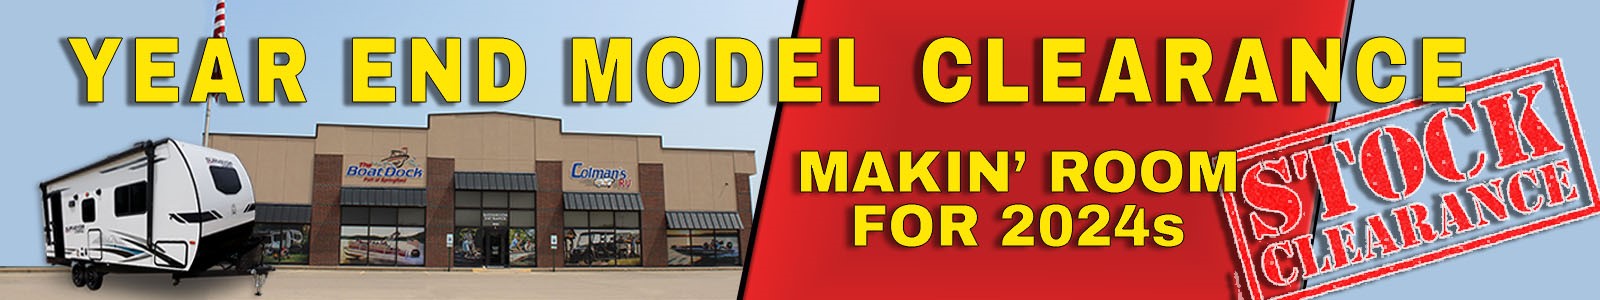 Model Clearance Banner